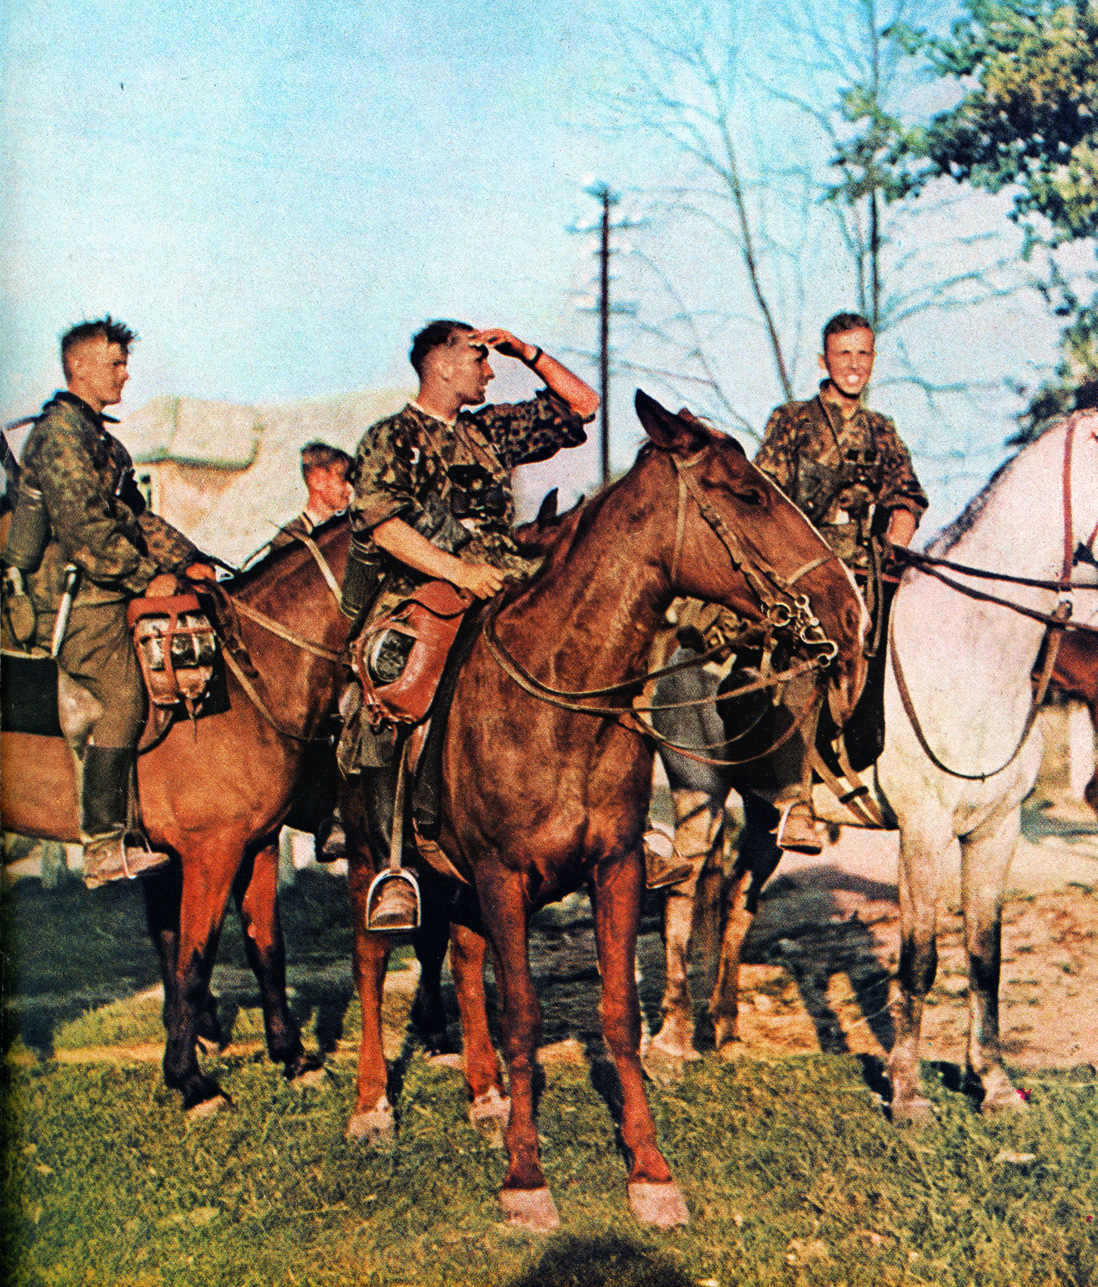 German SS troops rode into Russia in summer 1941 on horseback. Most of the troops and horses never made it back.